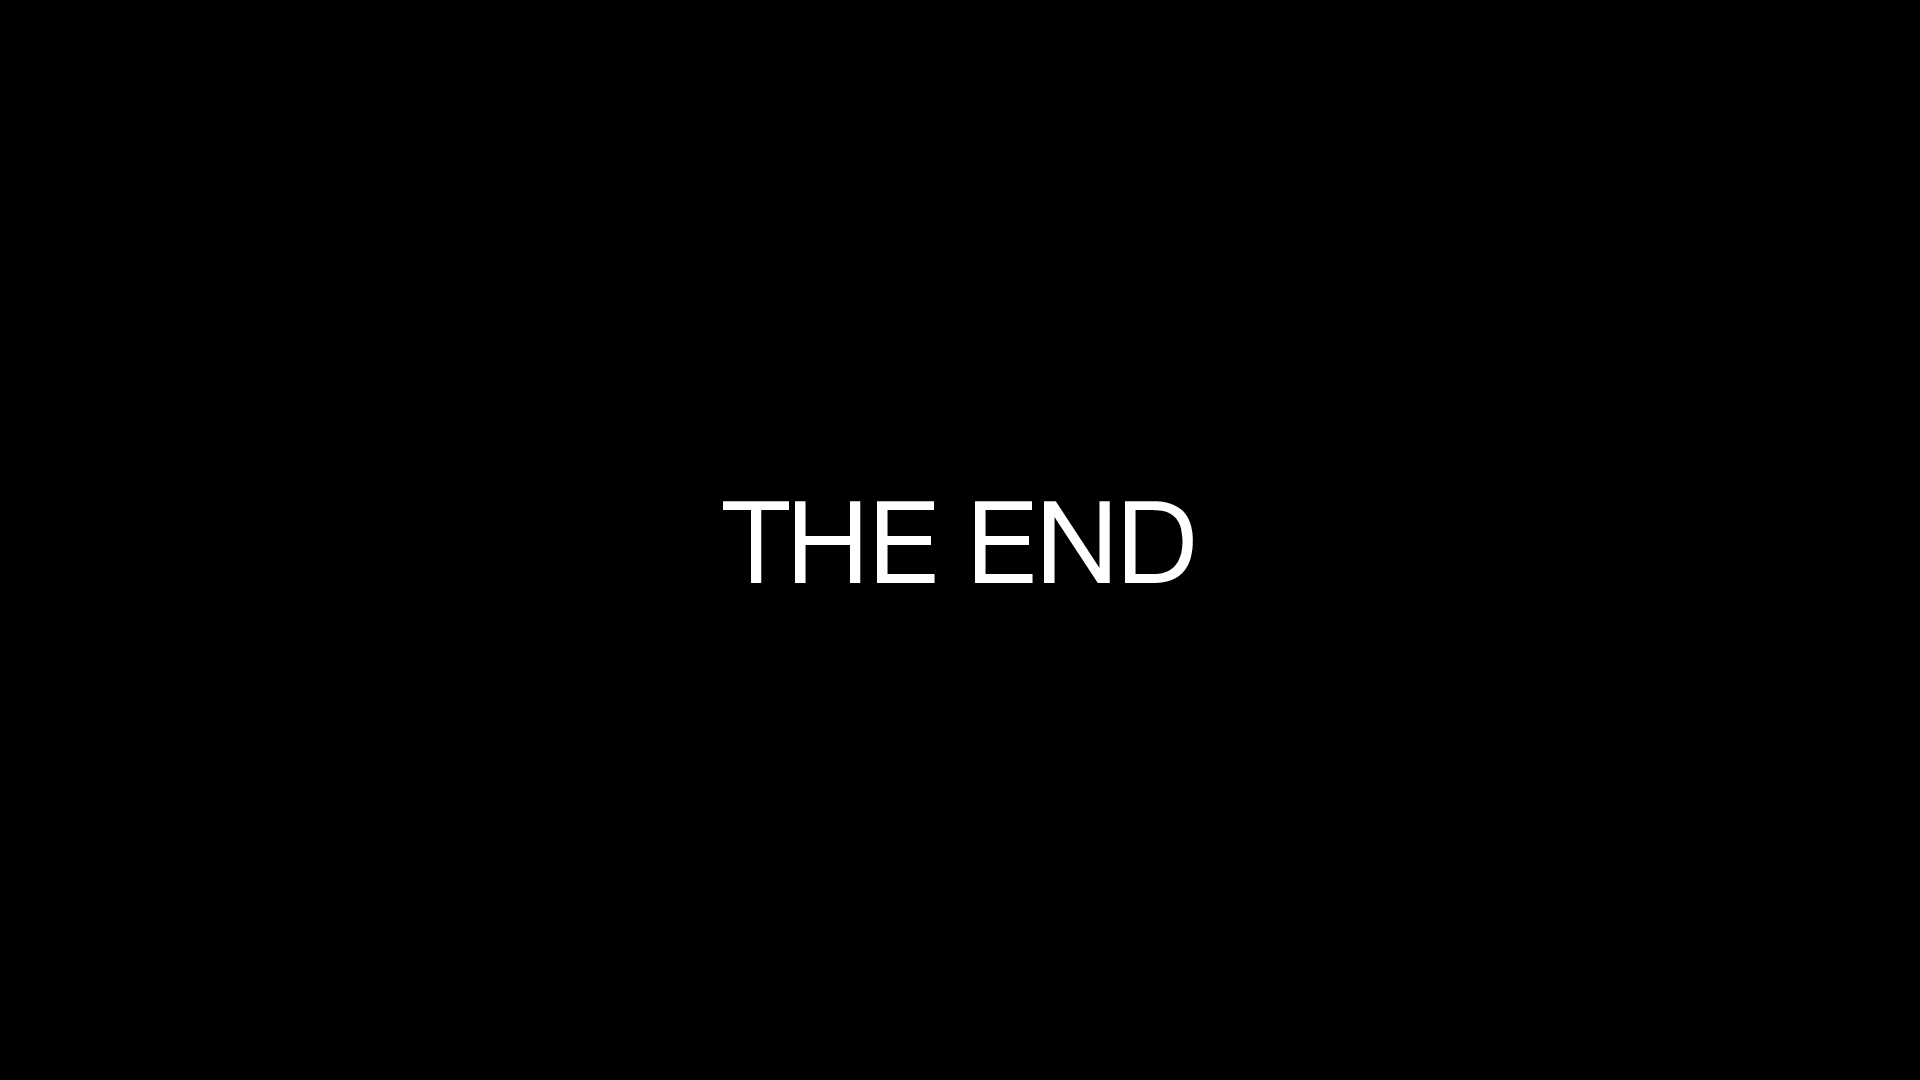 Reached the end. The end картинка. The end надпись. The end на черном фоне. Надписи на черном фоне.